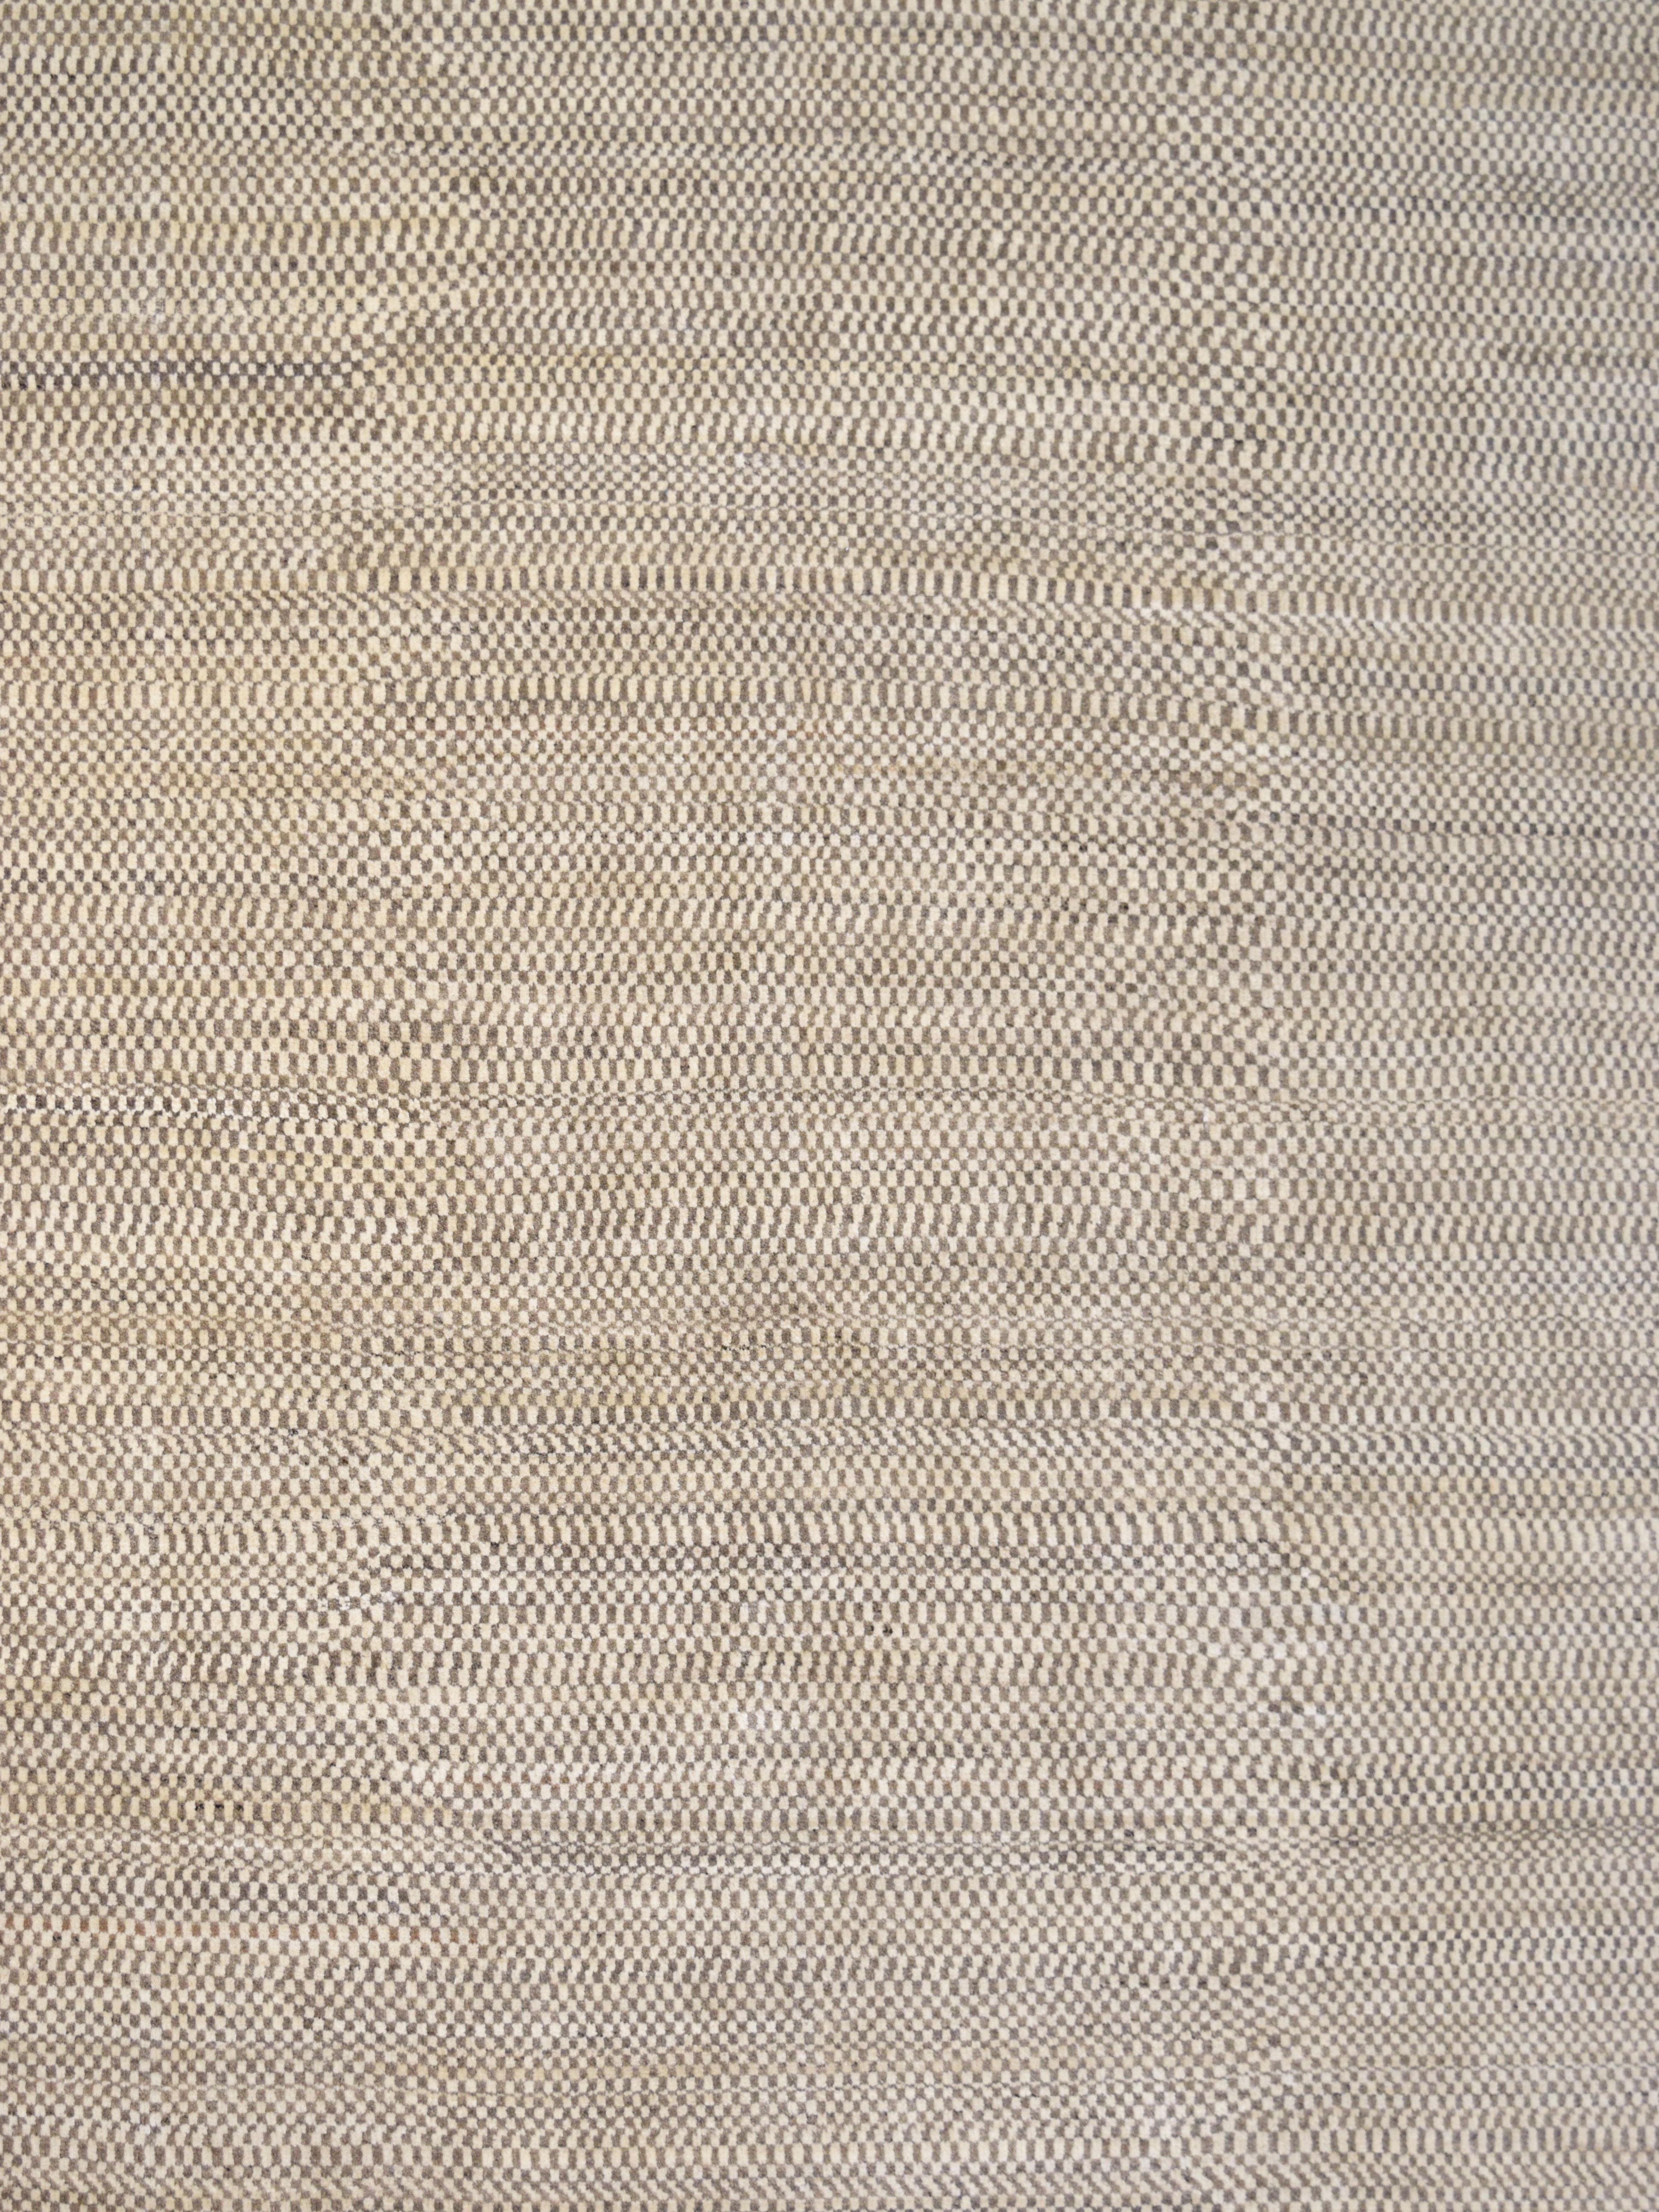 In simple tones of brown and cream, this approximately 8' x 10' modern and geometric Persian area rug, 